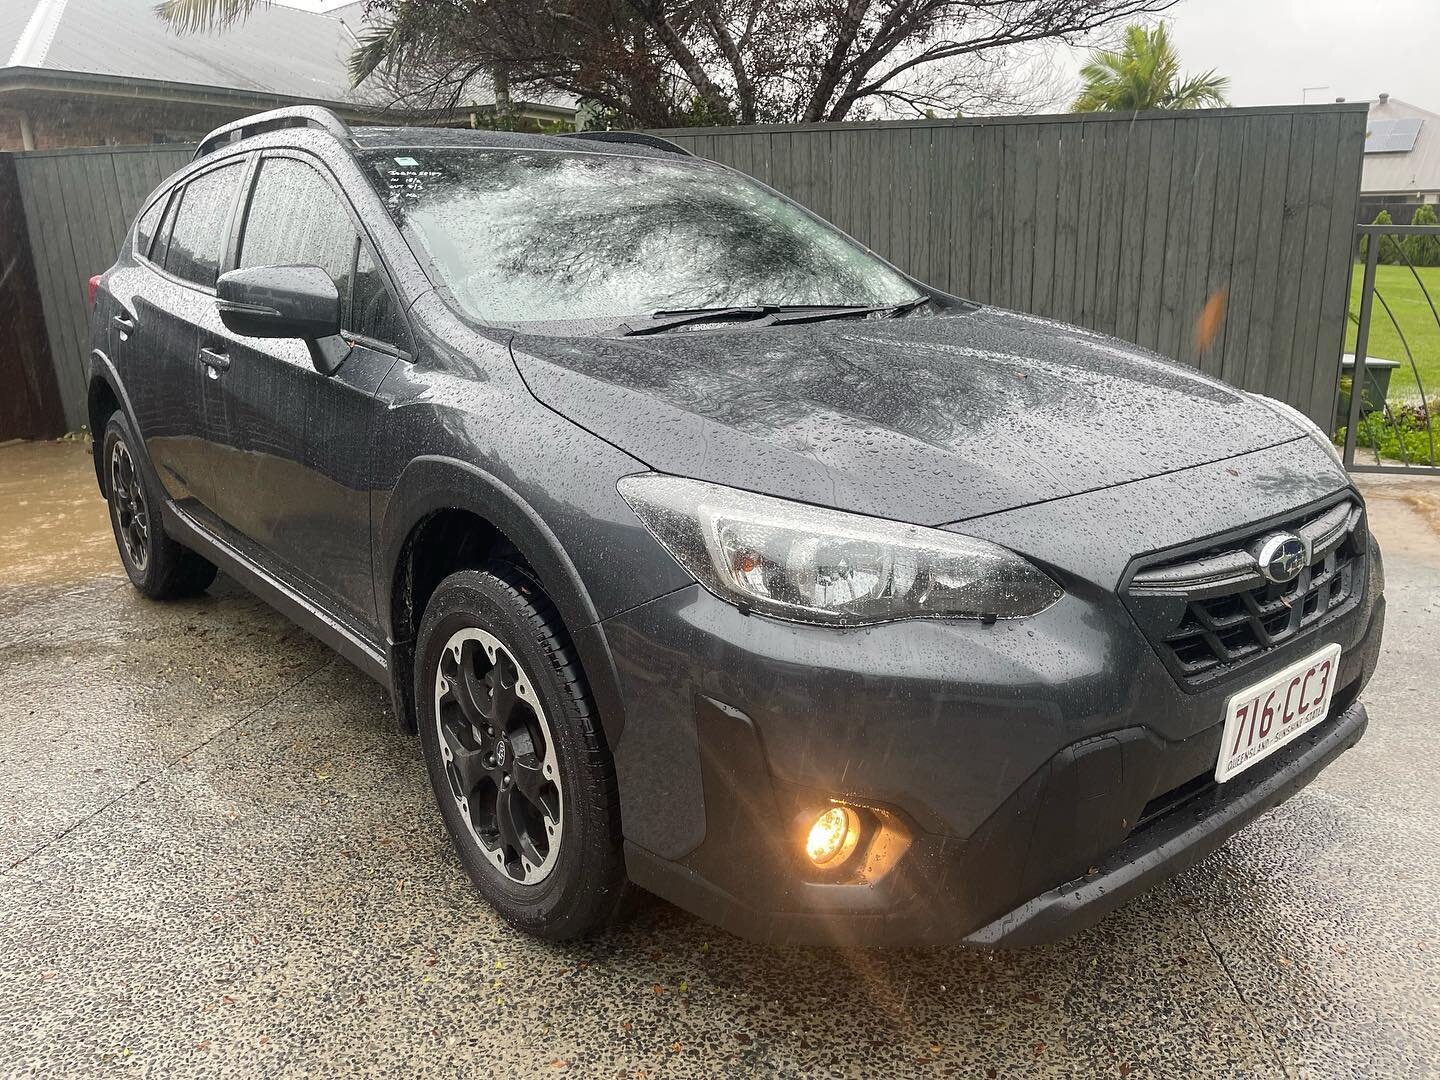 Subaru XV Hail Damage repair all straightened out within a couple of days..⚒ PDRTECH Autocare 📱0407118815  #Haildamage #hail #storm #hailstorm #summerstorms #stormdamage #pdr #pdrtechautocare #northbrisbane